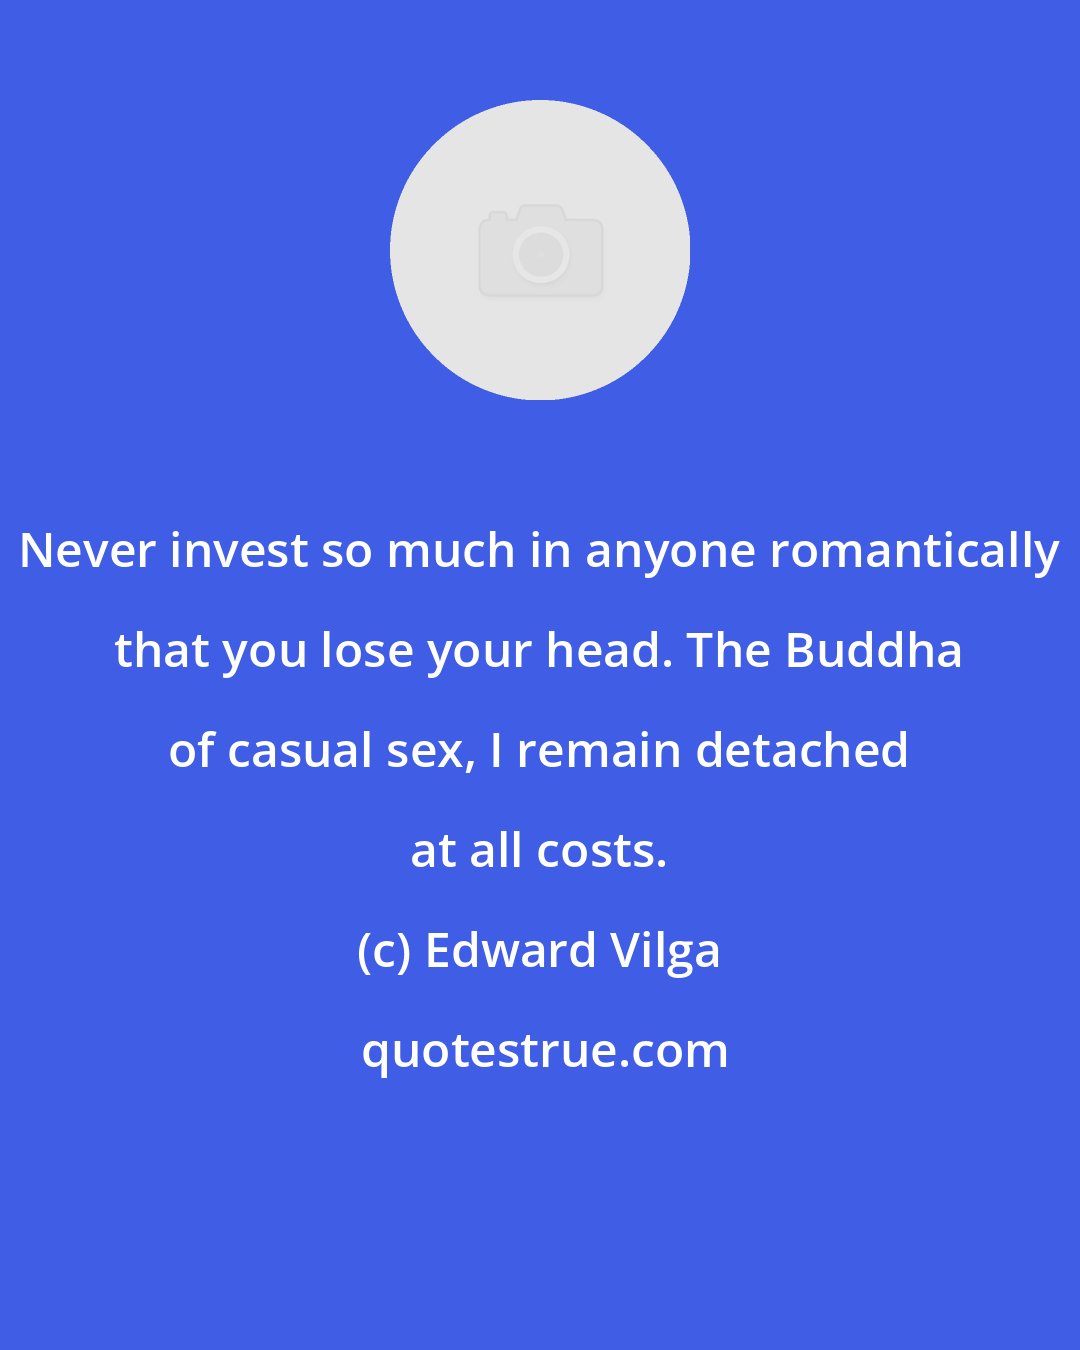 Edward Vilga: Never invest so much in anyone romantically that you lose your head. The Buddha of casual sex, I remain detached at all costs.